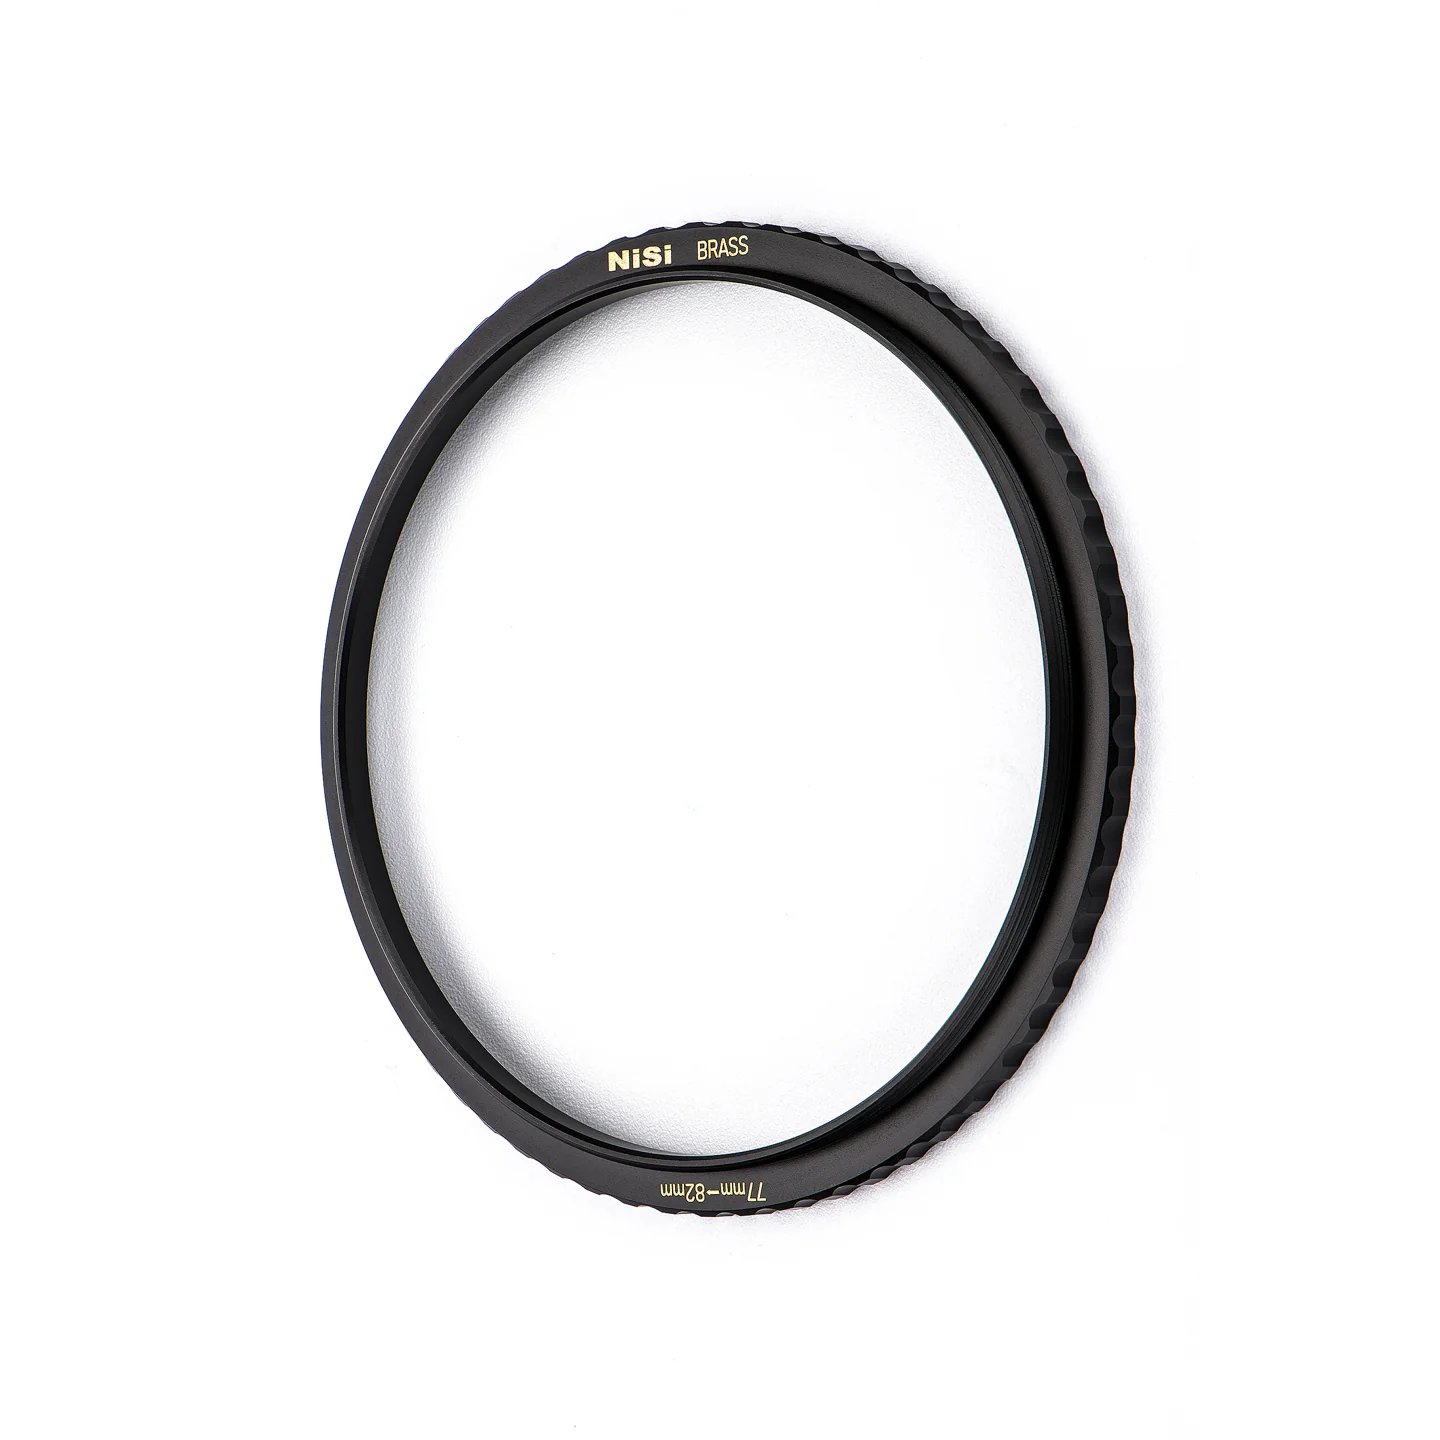 NiSi 58-82mm Brass Step Rings for Circular Filters Nisi Stepping Ring